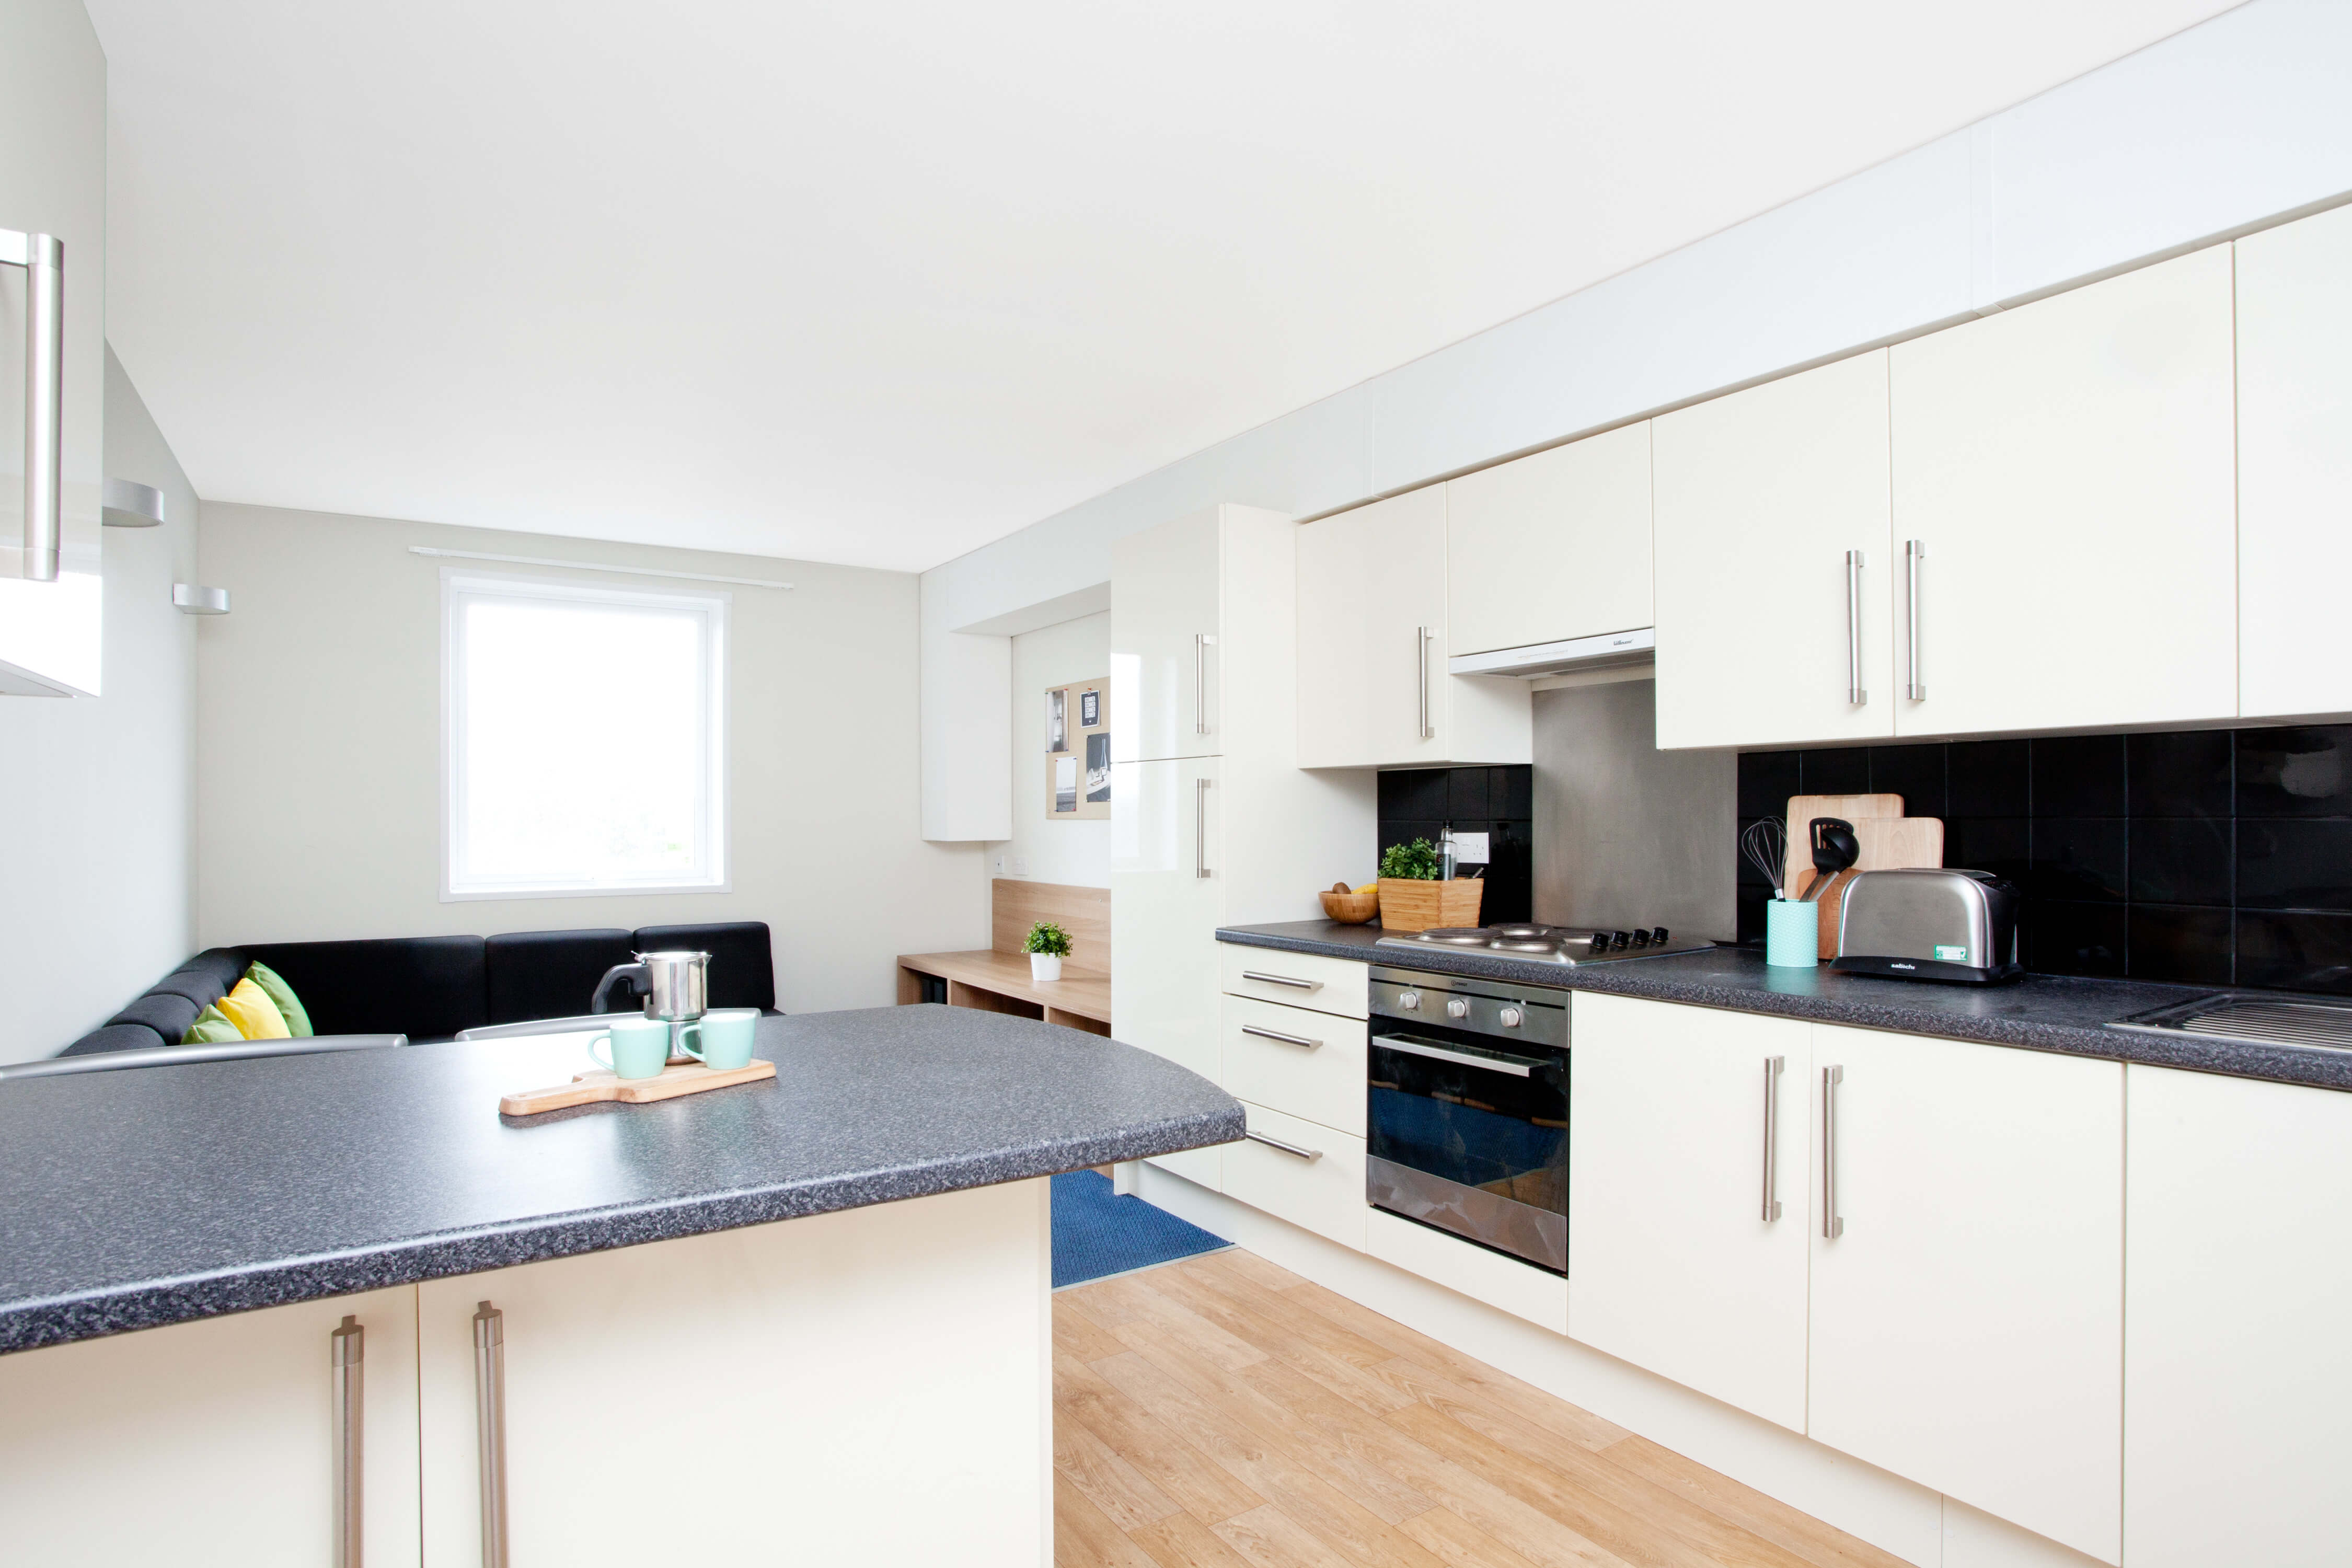 Shared kitchen area at Dorset House